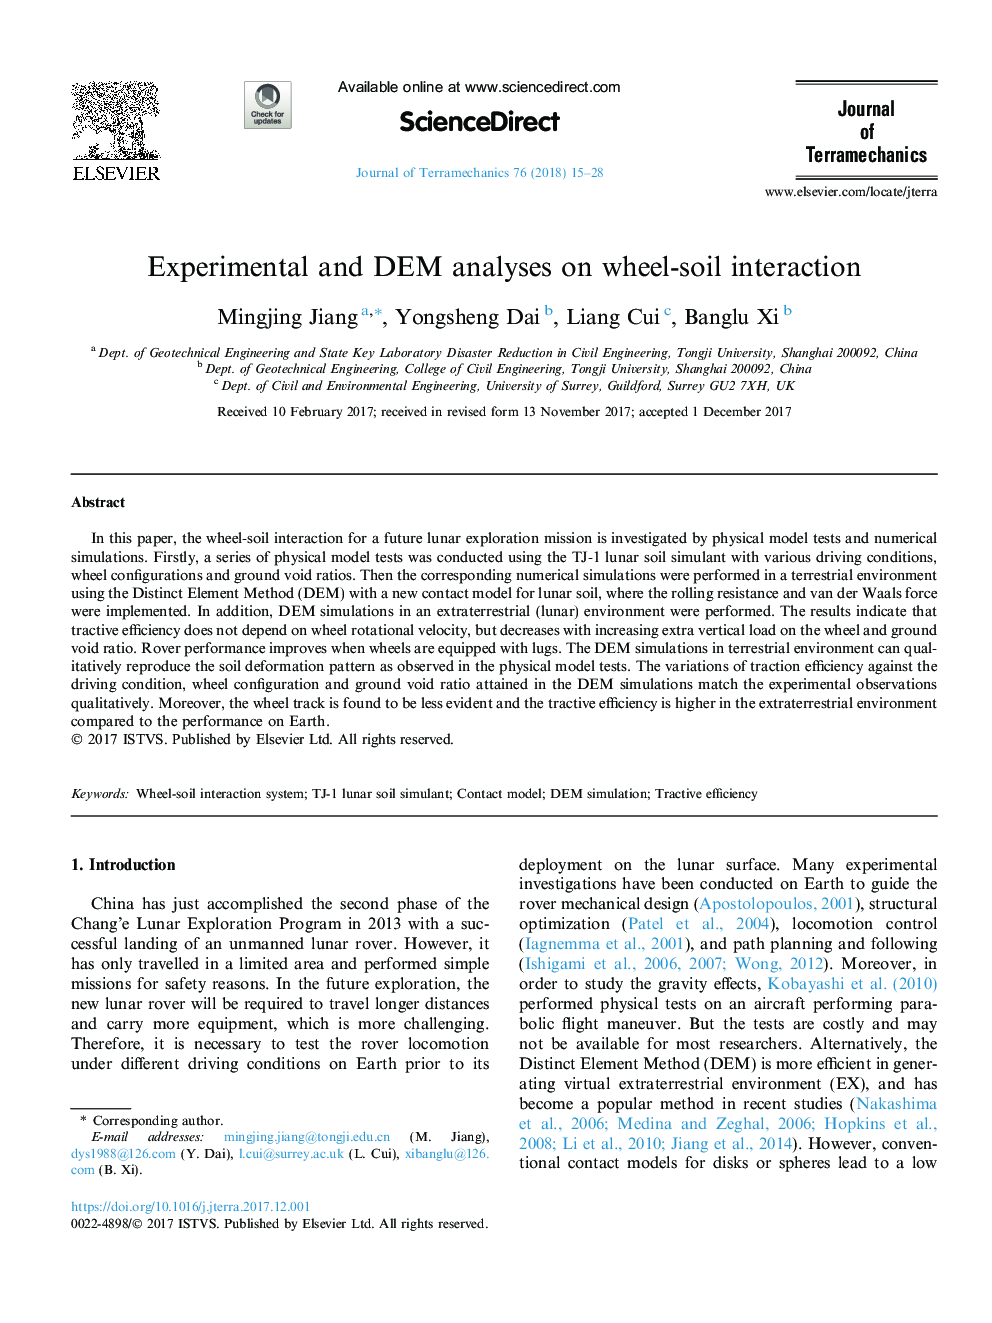 Experimental and DEM analyses on wheel-soil interaction